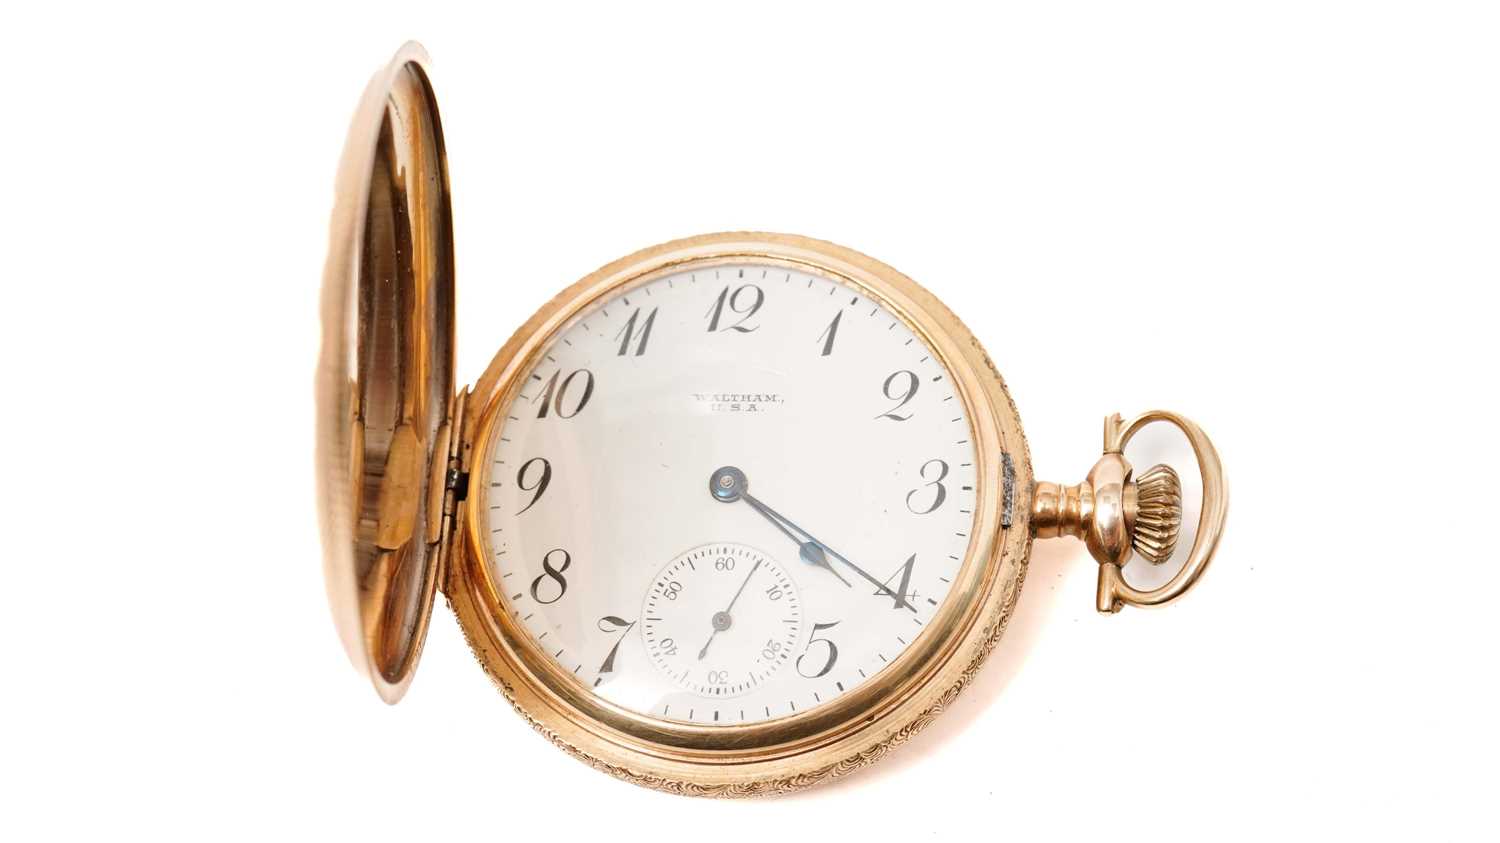 Lot 1032 - Waltham, Massachusetts for P.S. Bartlett: a 14ct yellow gold cased hunter pocket watch